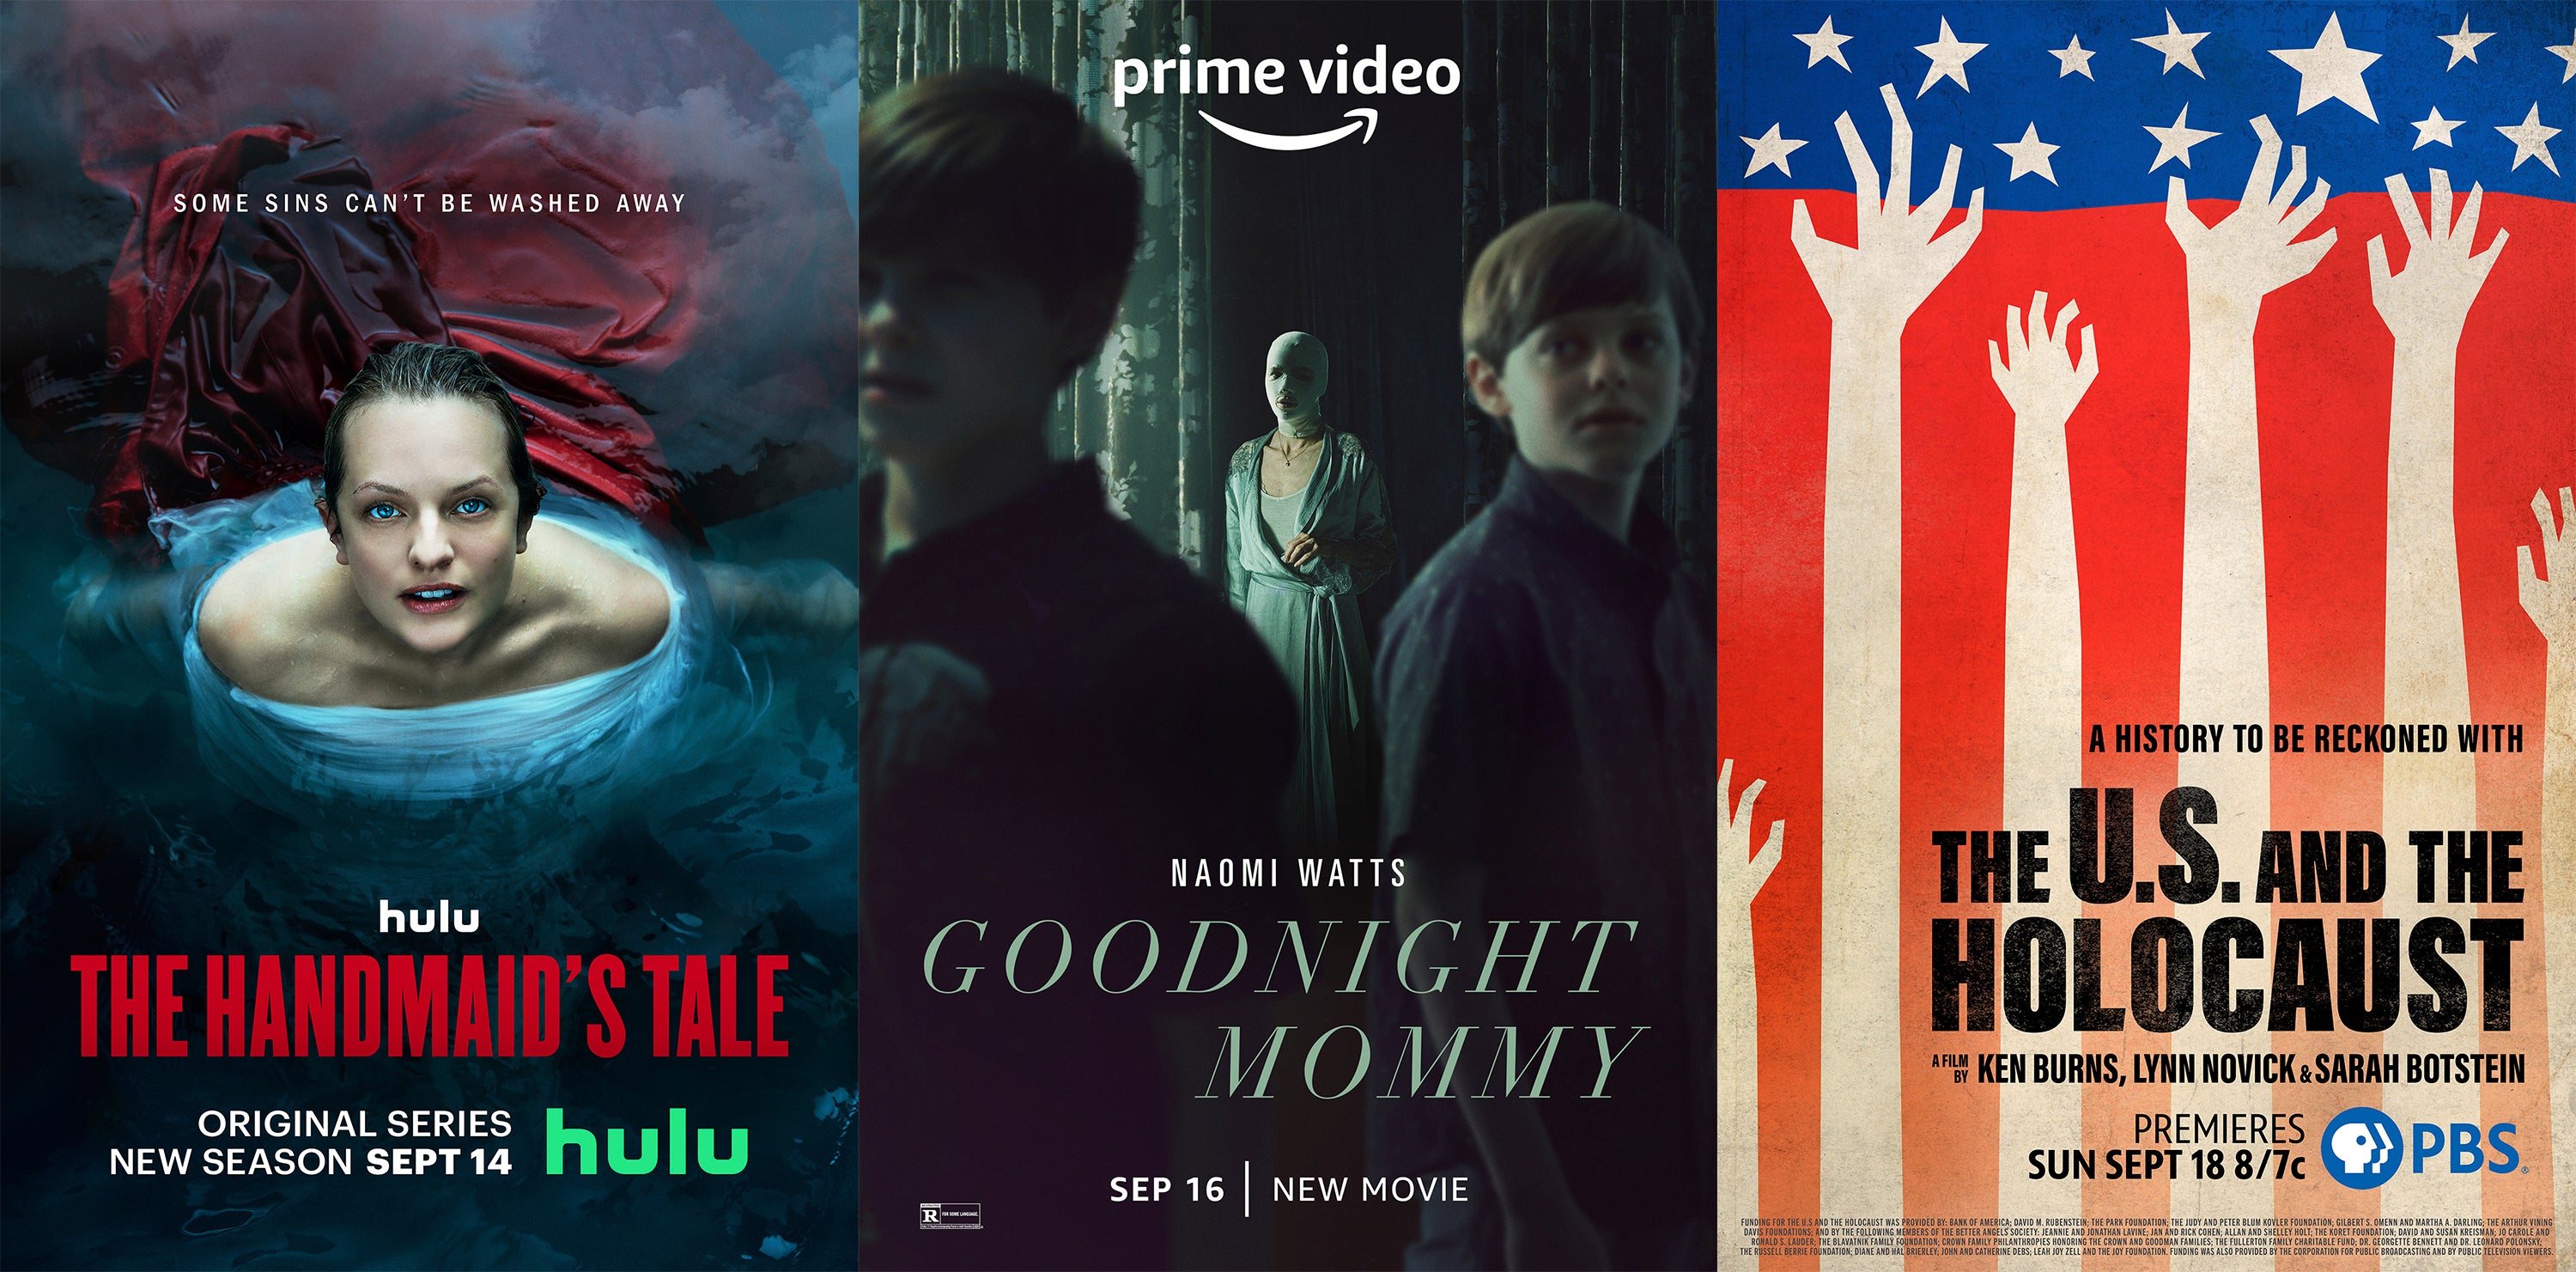 New this week The Handmaids Tale and Goodnight Mommy The Independent